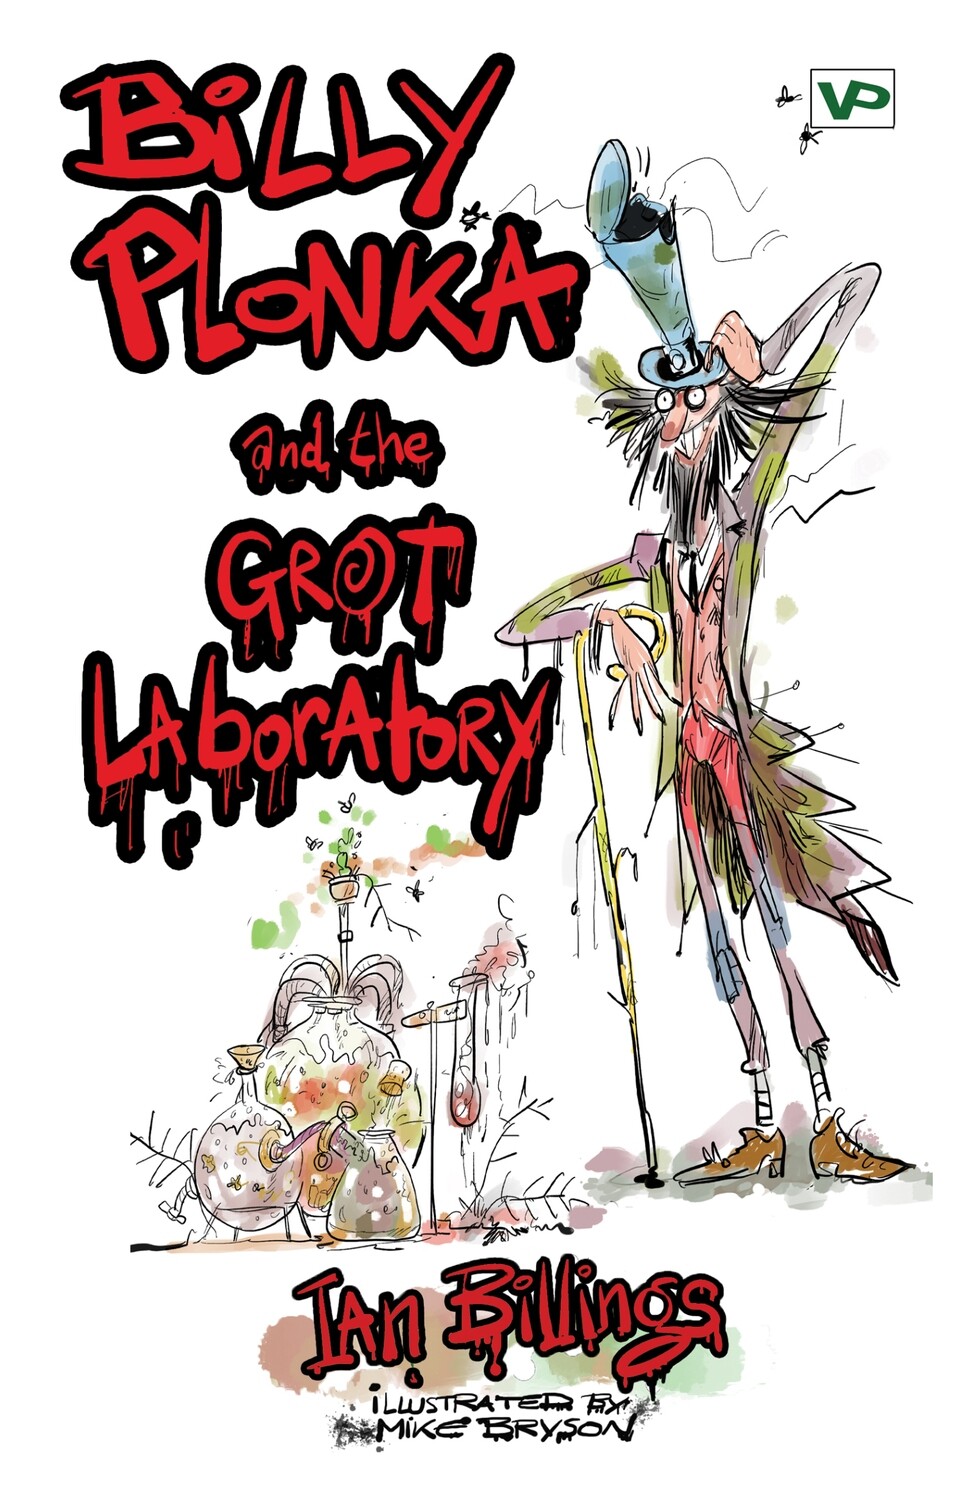 Billy Plonka and the Grot Laboratory - Paperback Book